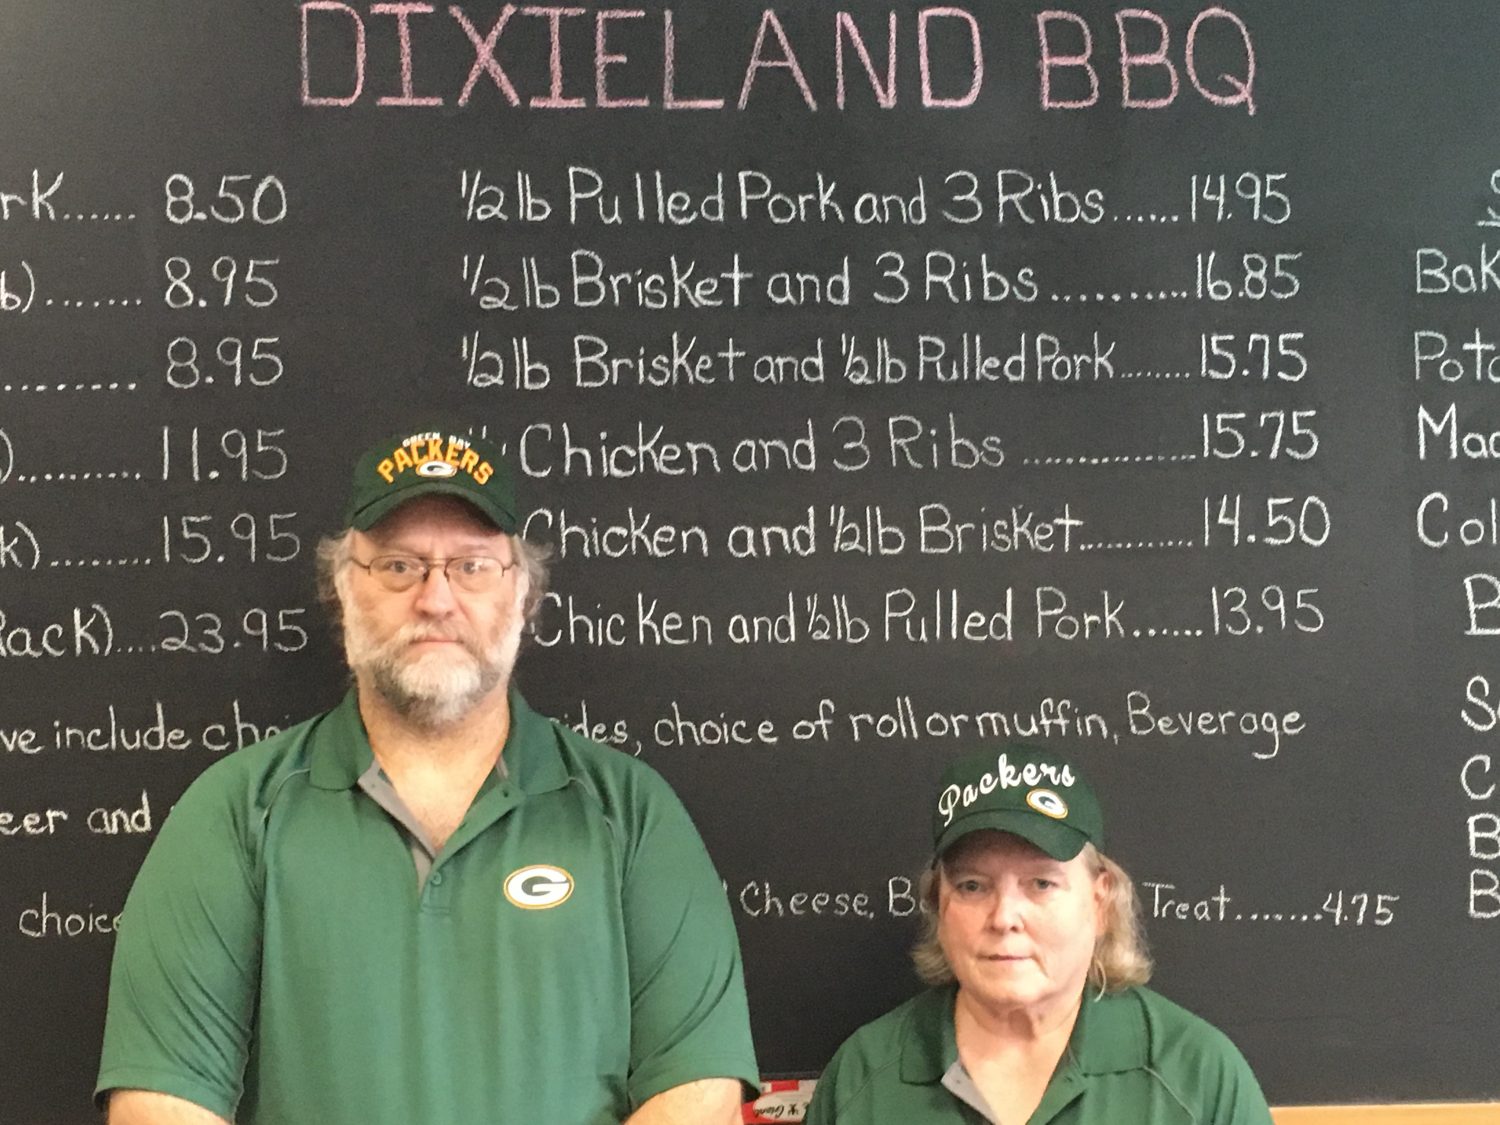 Dixieland BBQ brings fresh, new dining option to downtown